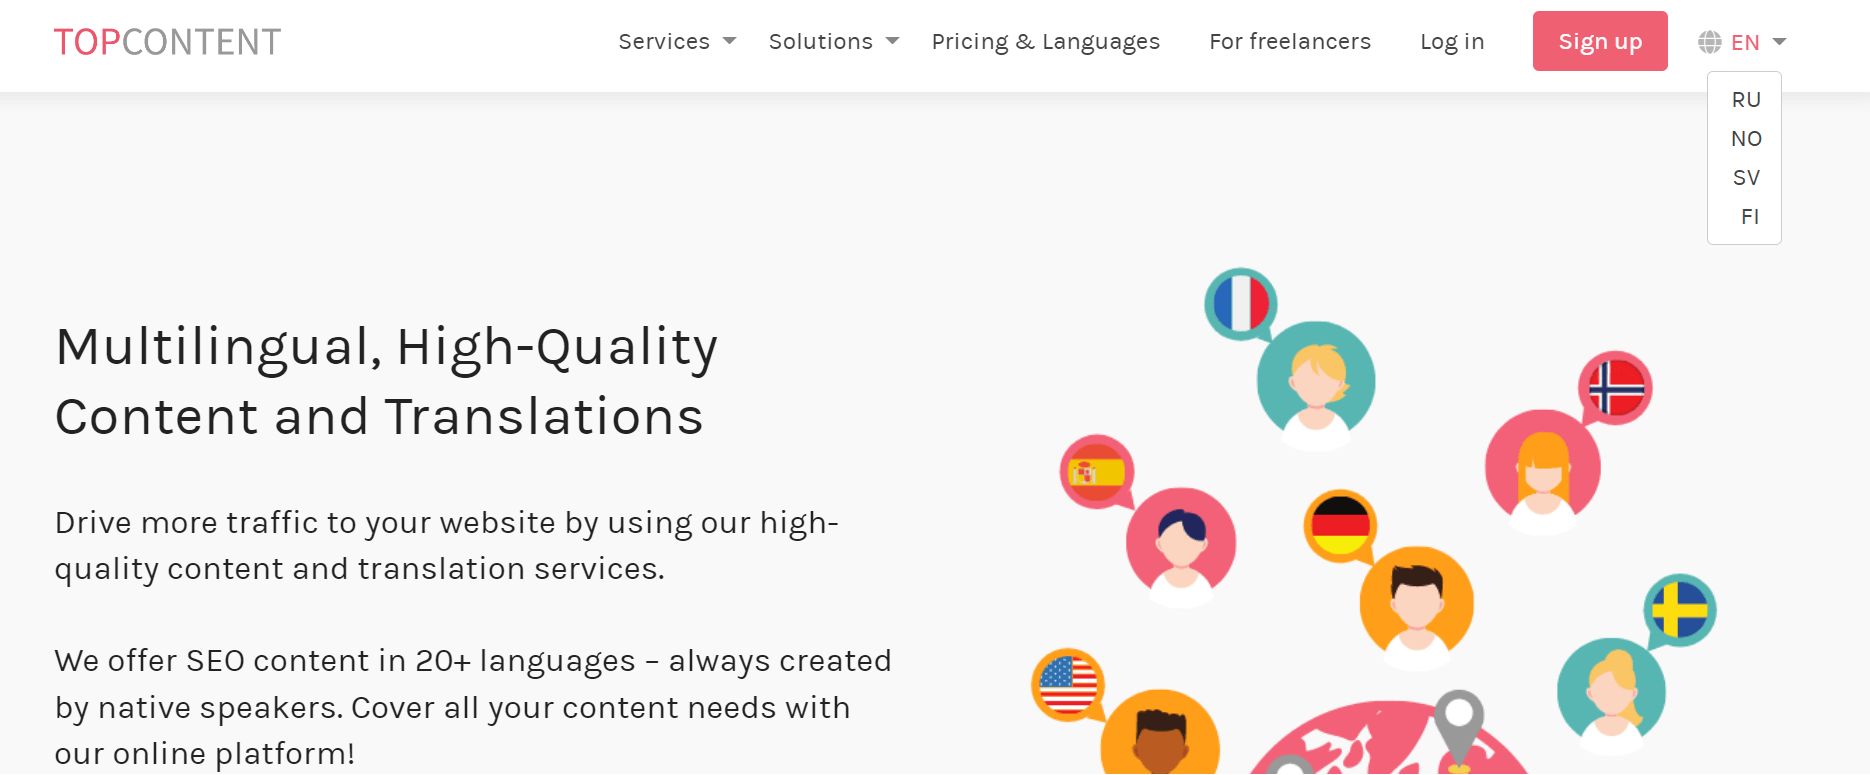 Website menu with different language options